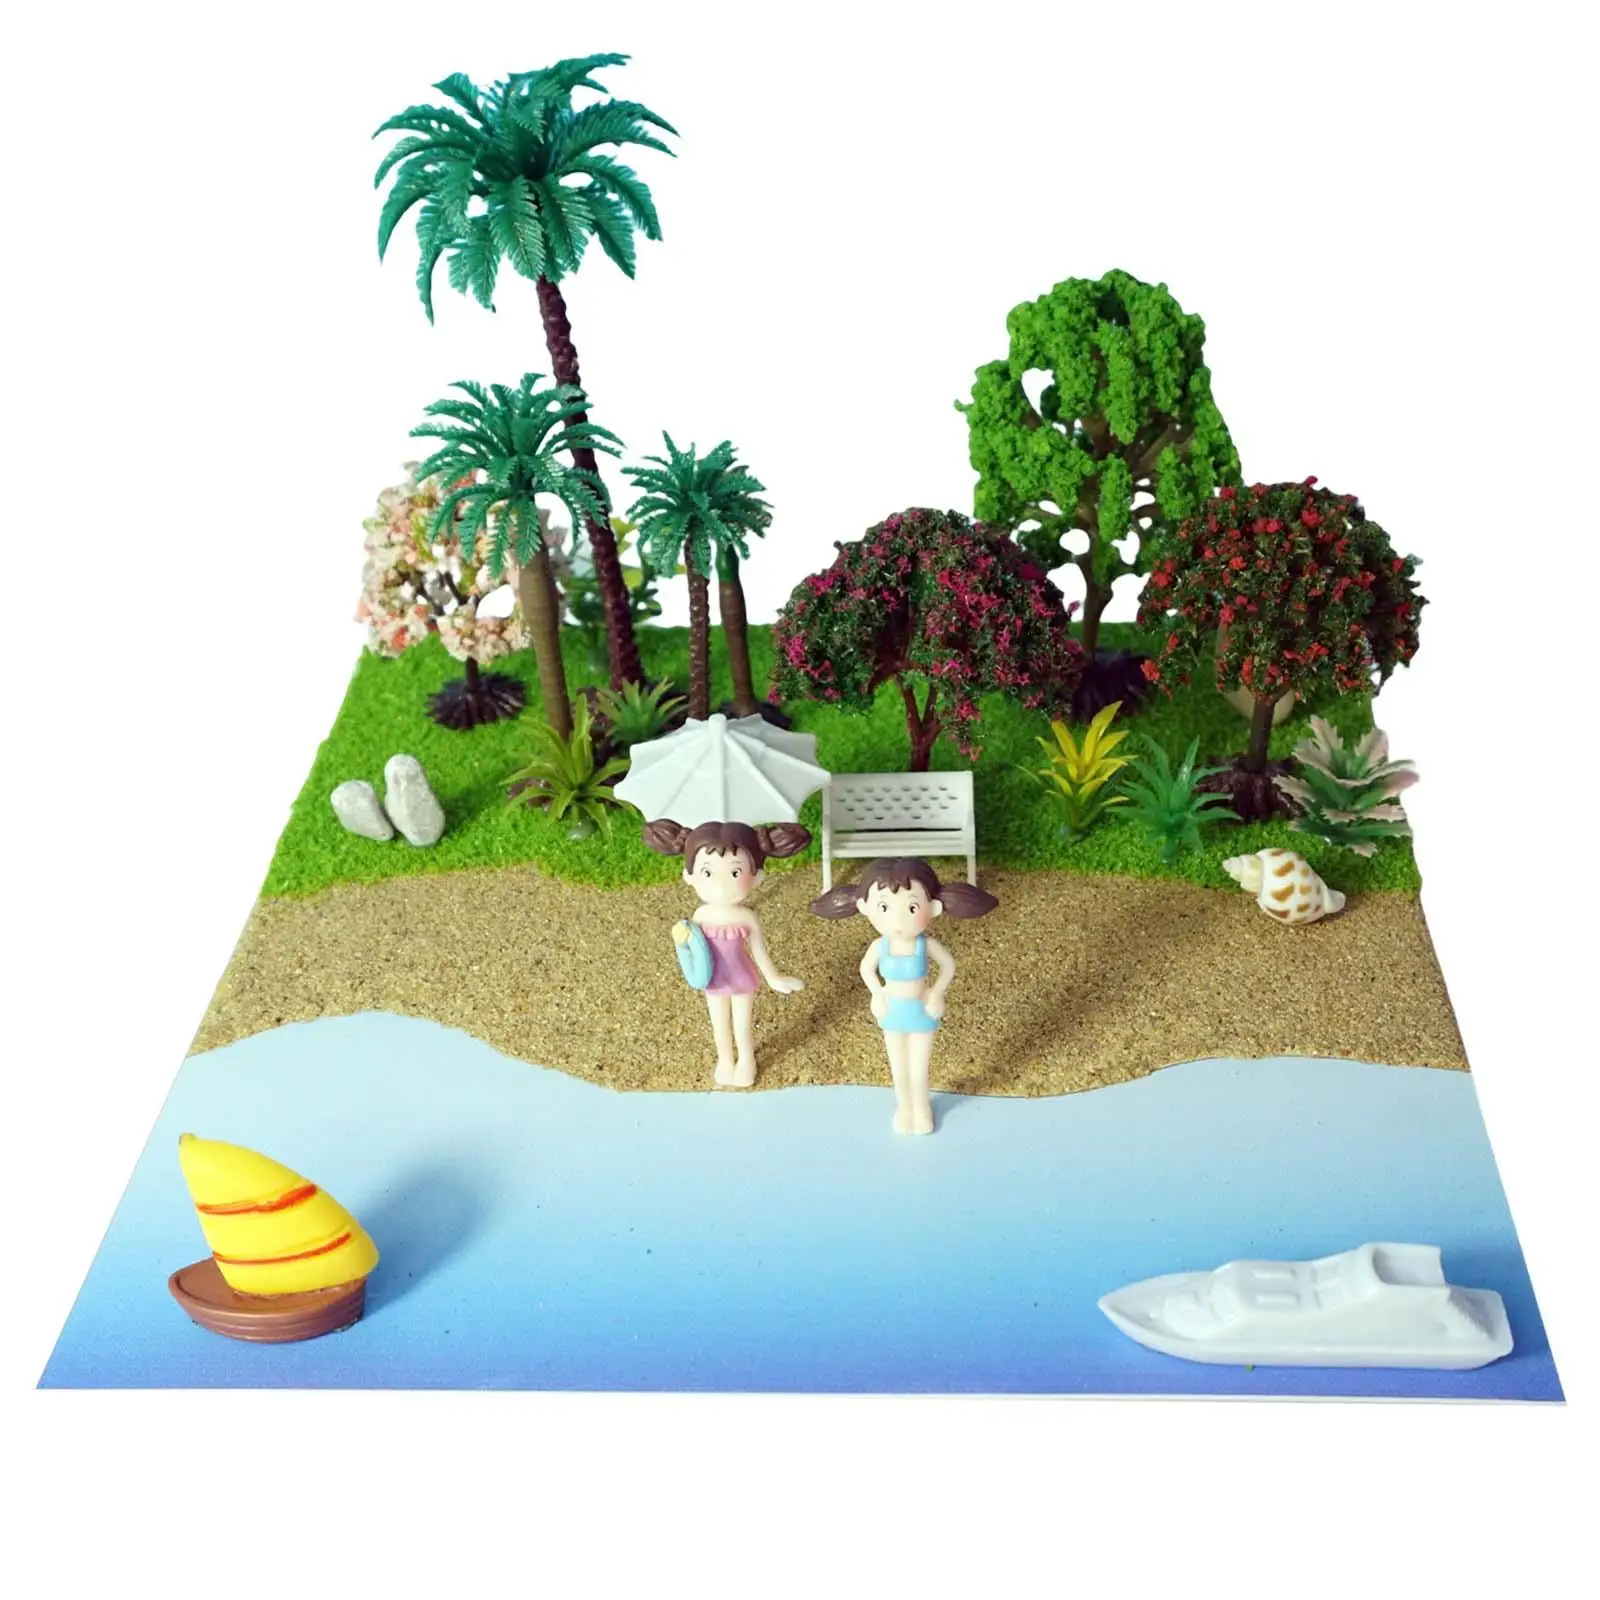 beach scenes Model Layout kits Simulation with Accessories beach scenes Model Display for Desk Hand On Ability Railroad Layouts